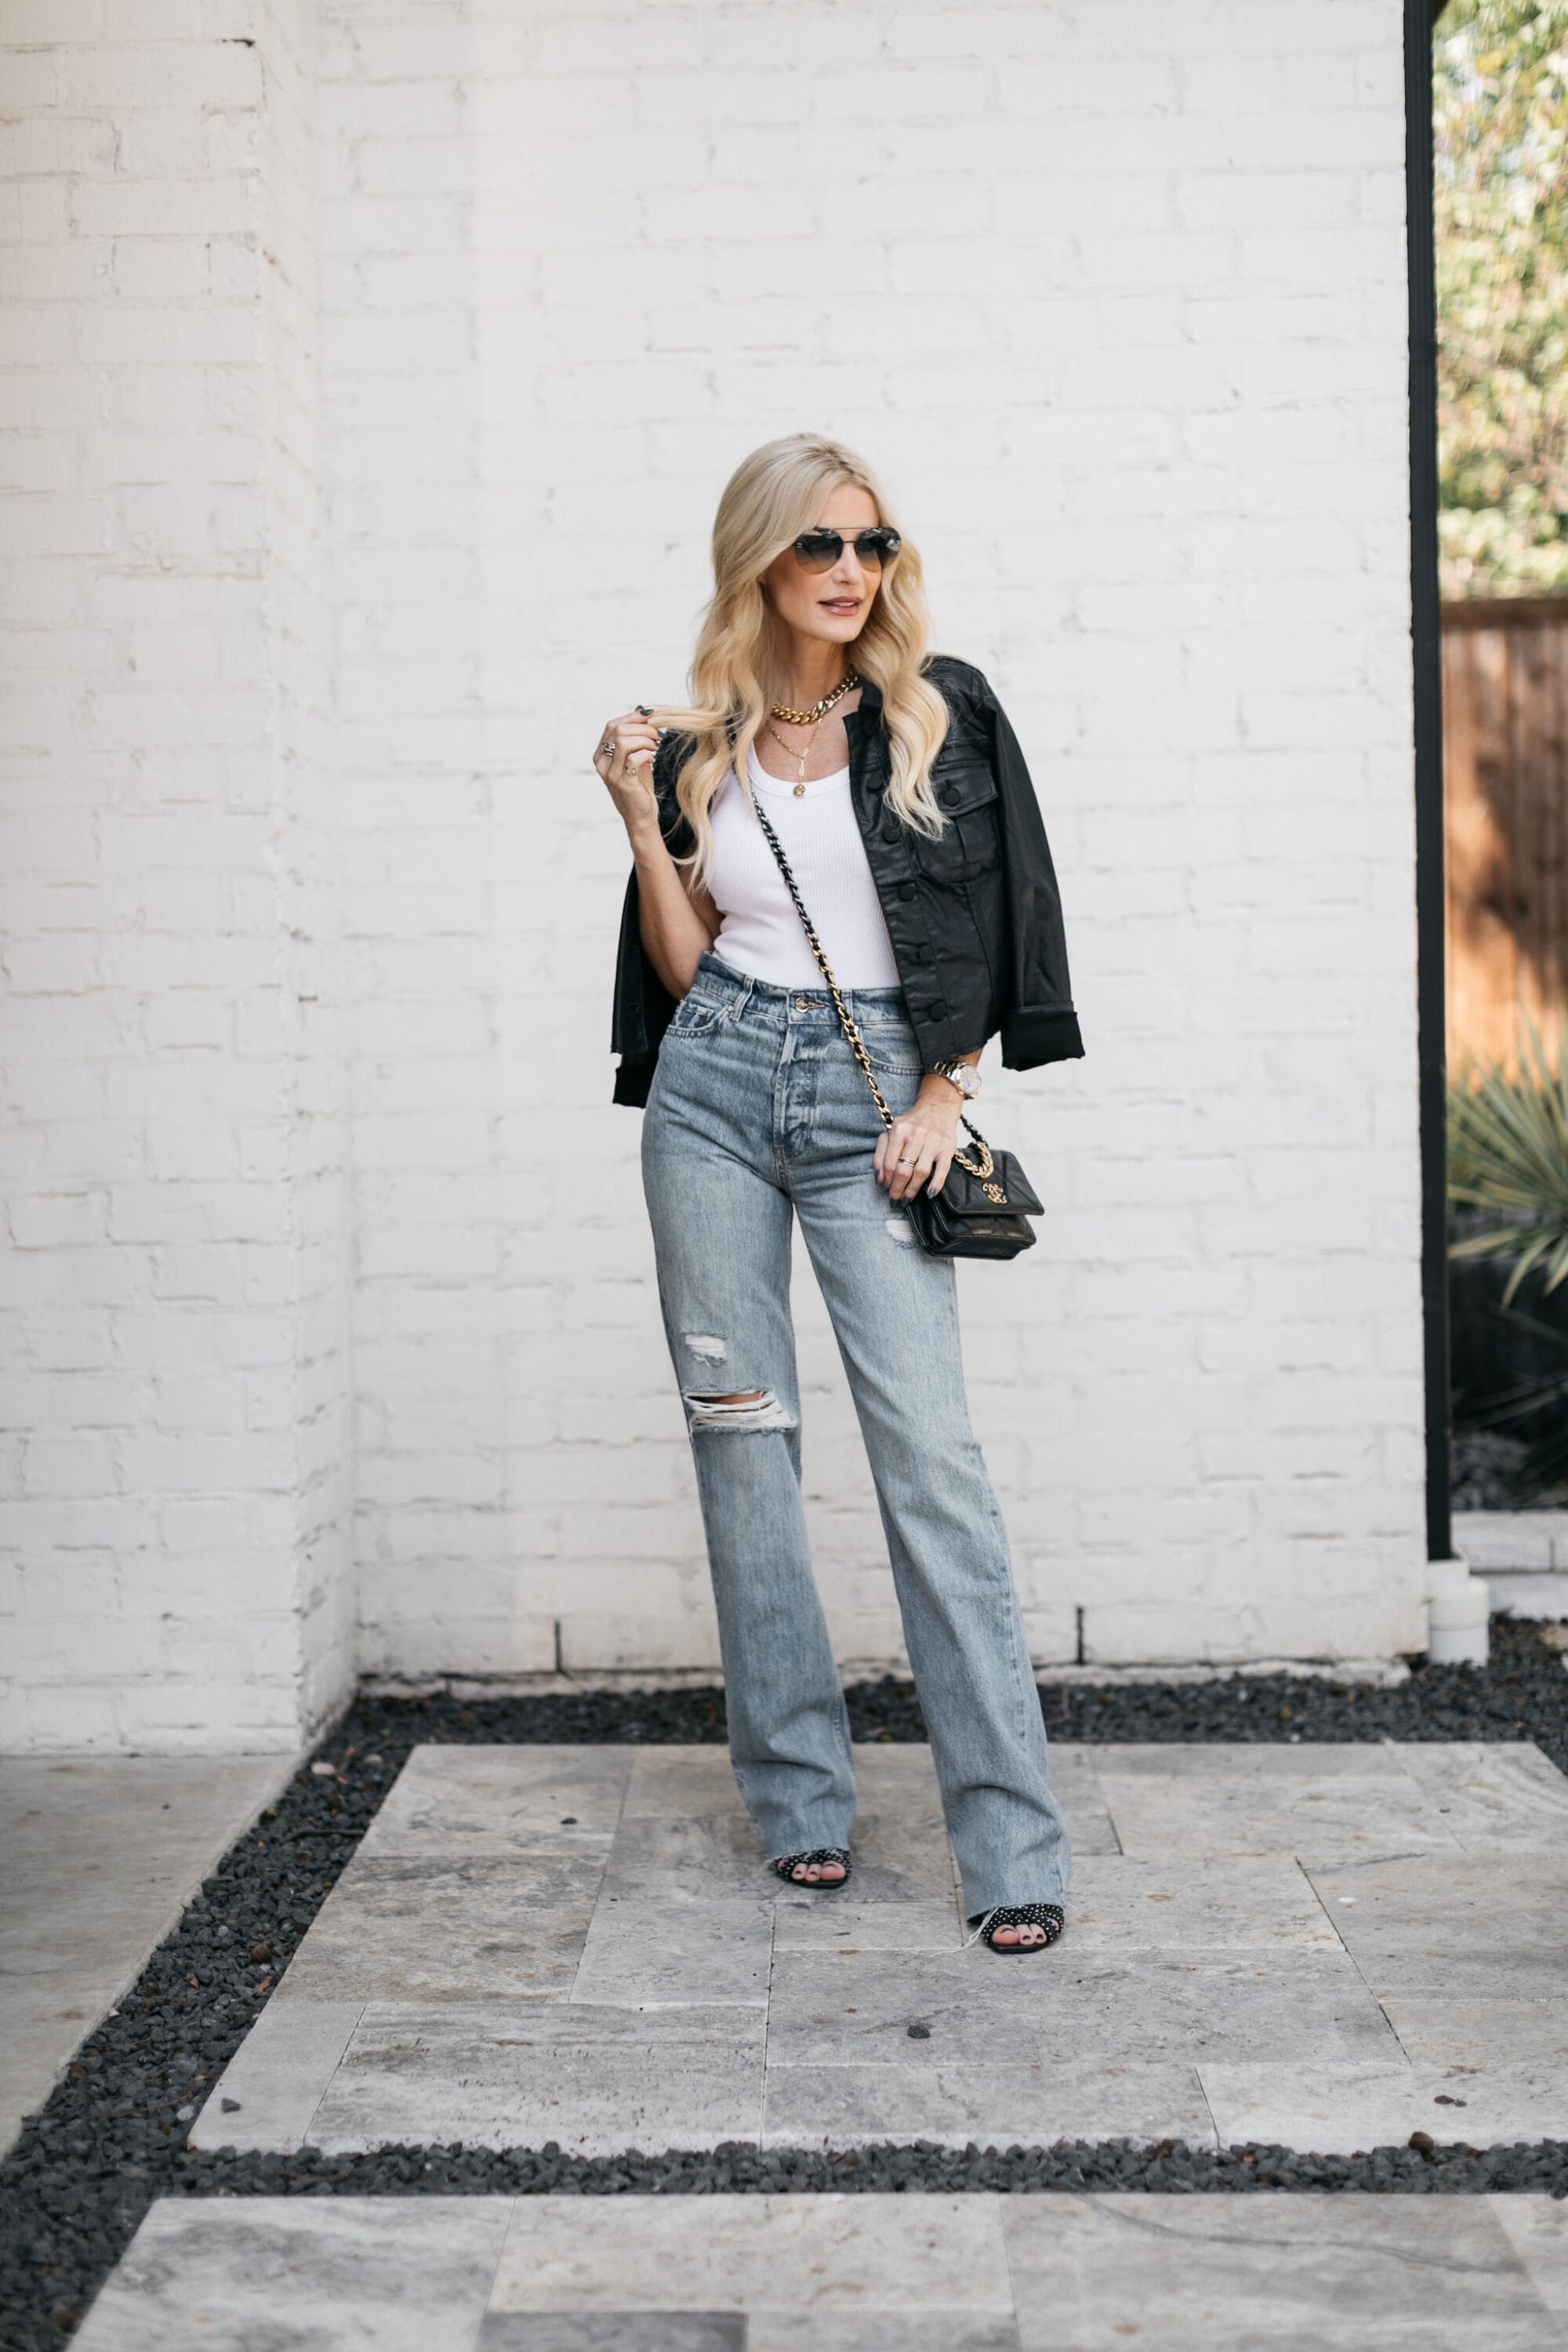 Over 40 fashion influencer wearing coated denim jacket and Anine Bing jeans.